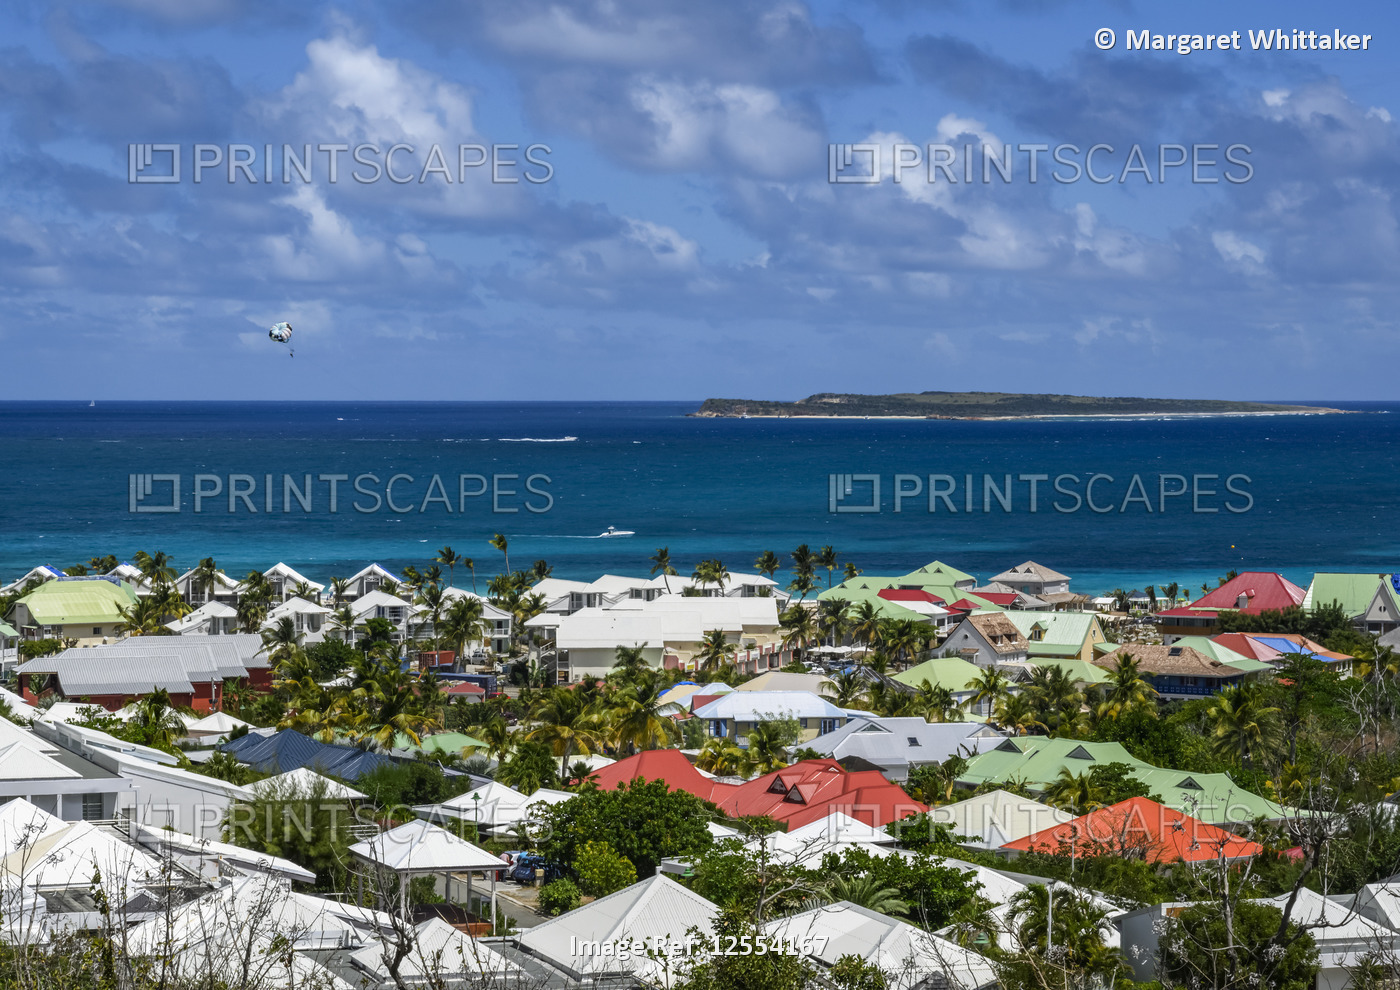 Colourful house rooftops looking out to sea on the island of St. Maarten; ...